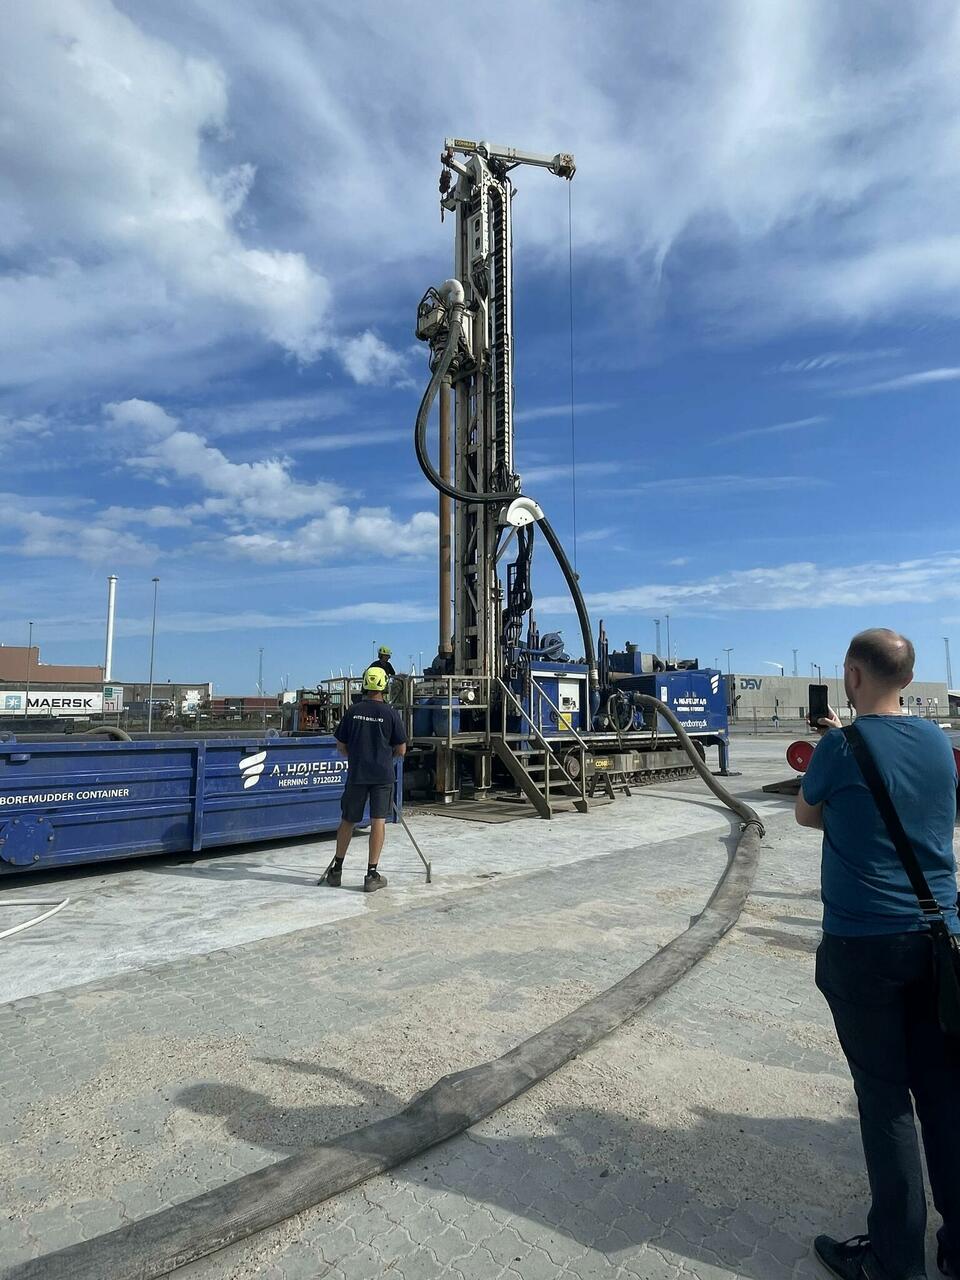 This photo was taken Late September 2023 in Aarhus, Denmark, where a drilling rig is drilling the initial section of a geothermal borehole for the biggest geothermal power plant in Europe.